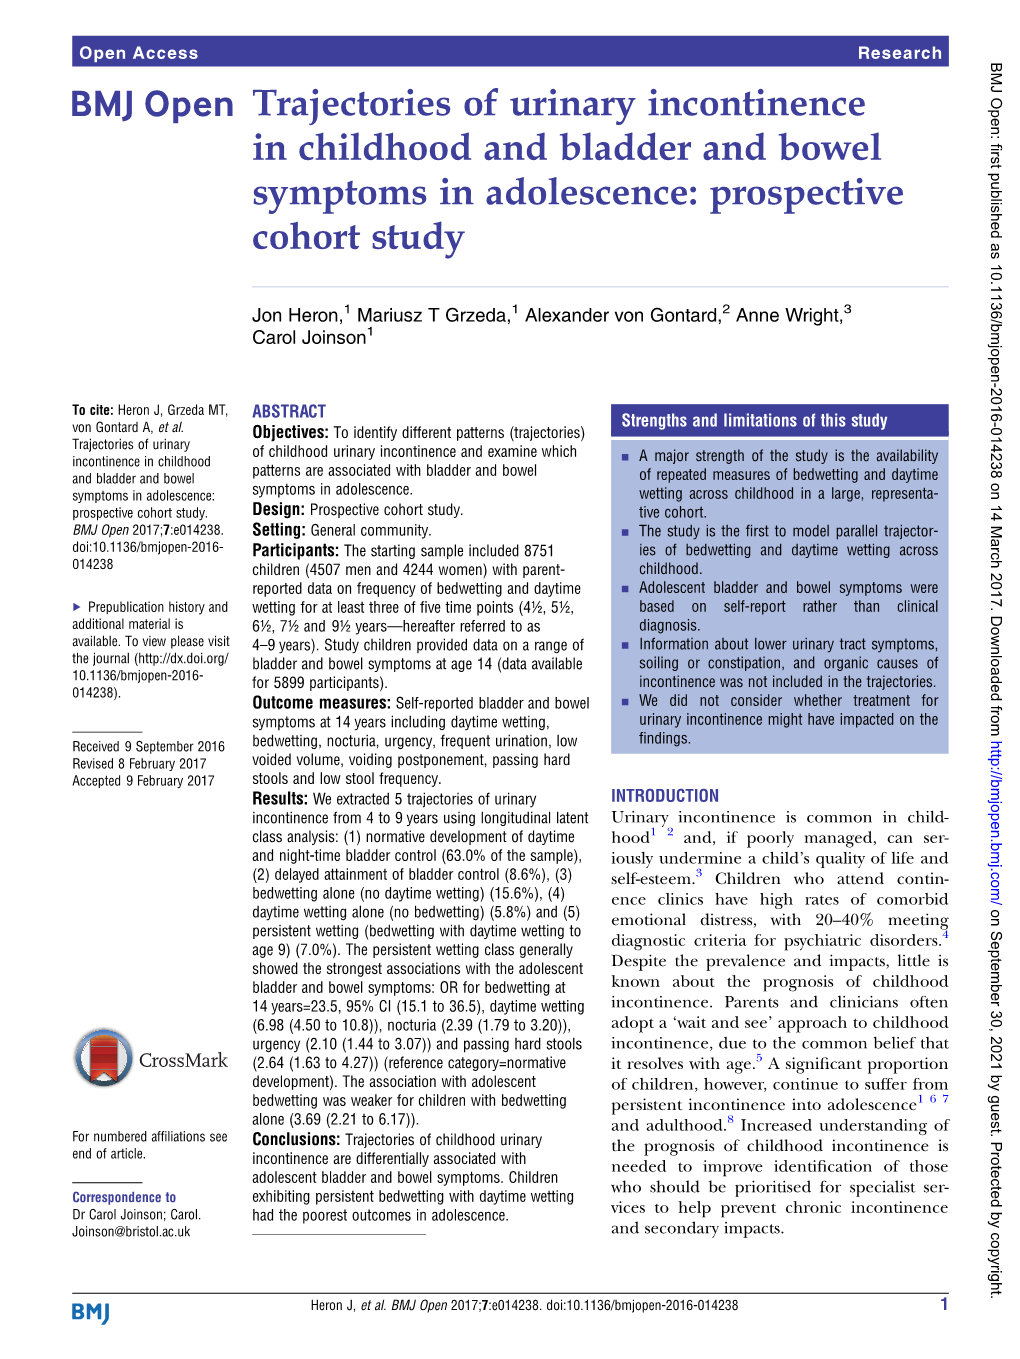 Trajectories of Urinary Incontinence in Childhood and Bladder and Bowel Symptoms in Adolescence: Prospective Cohort Study